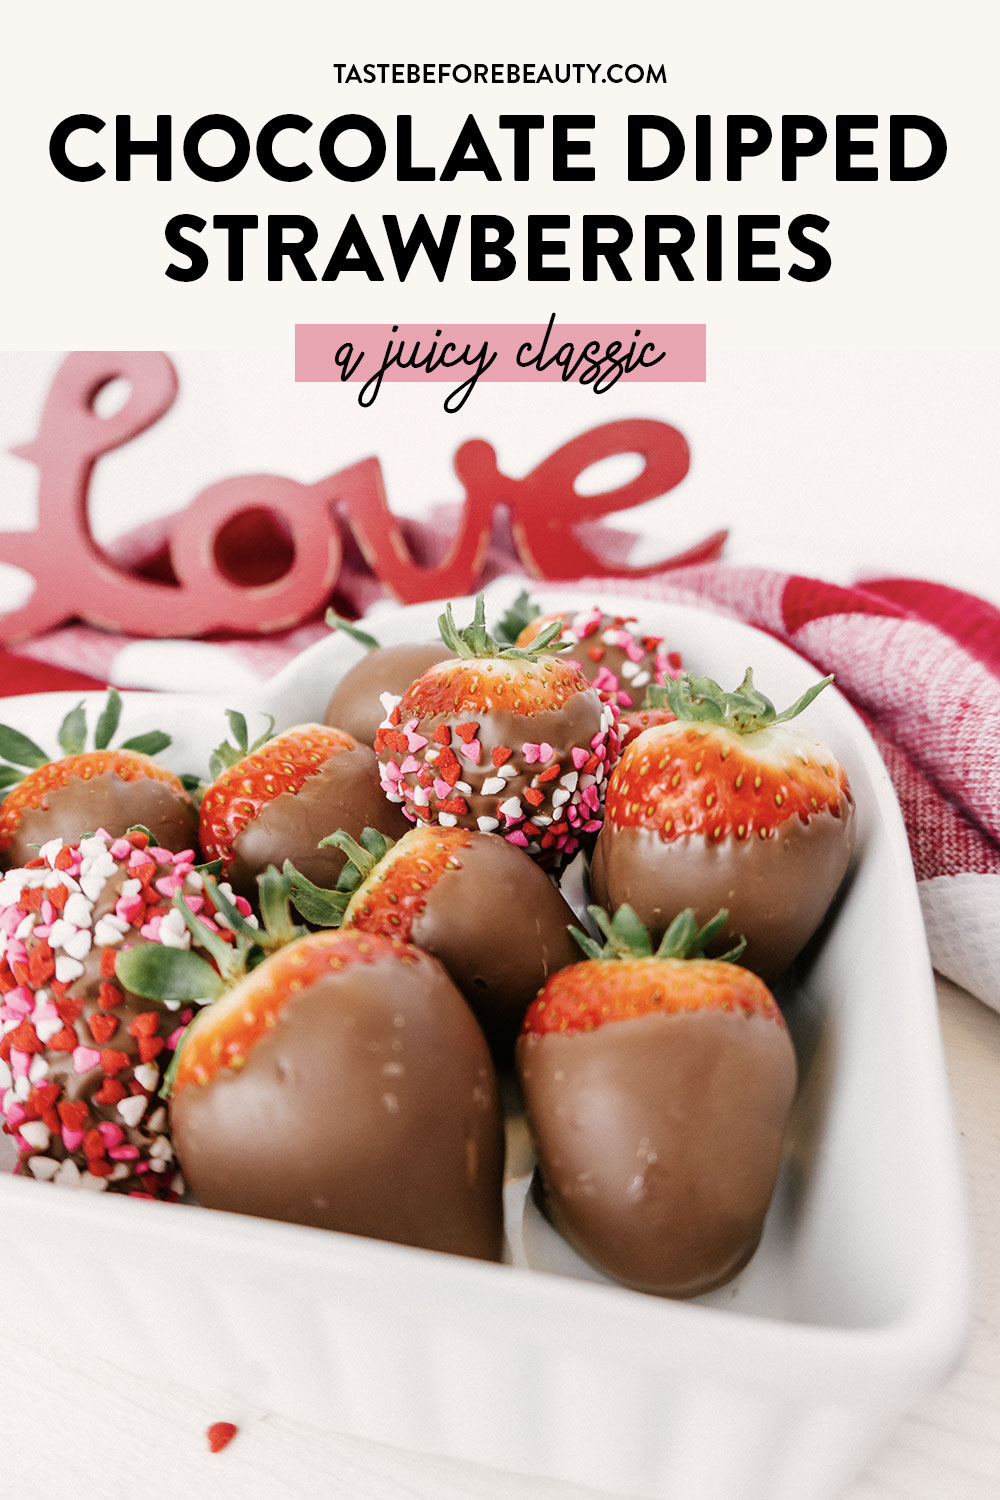 taste before beauty chocolate dipped strawberries in heart dish with sprinkles pinterest pin